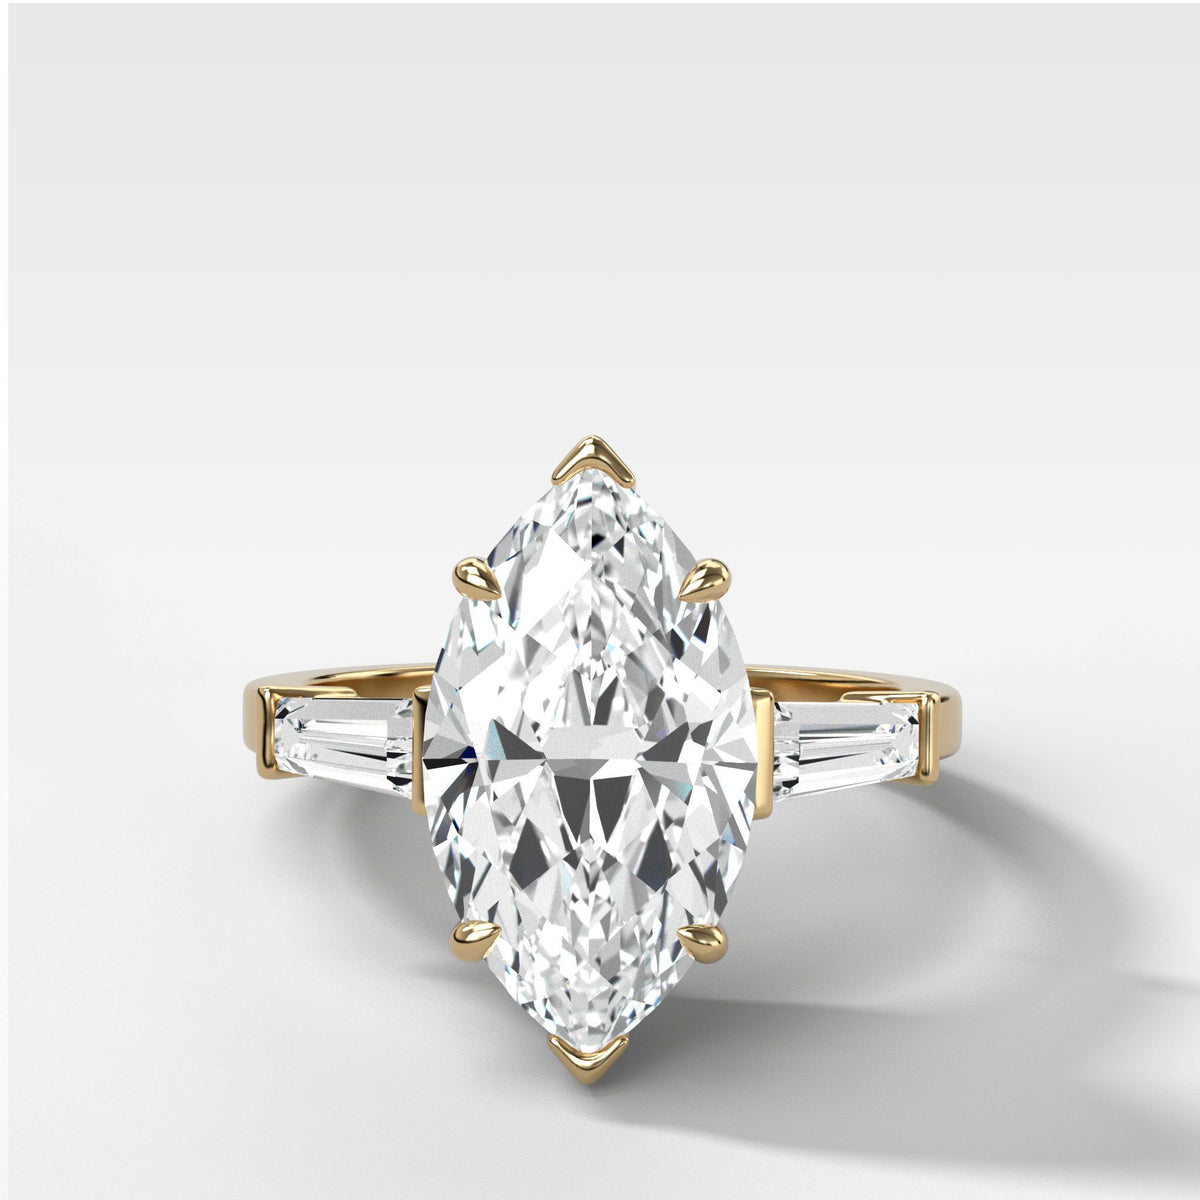 Translunar Tapered Baguette Engagement Ring With Marquise Cut by Good Stone in Yellow Gold